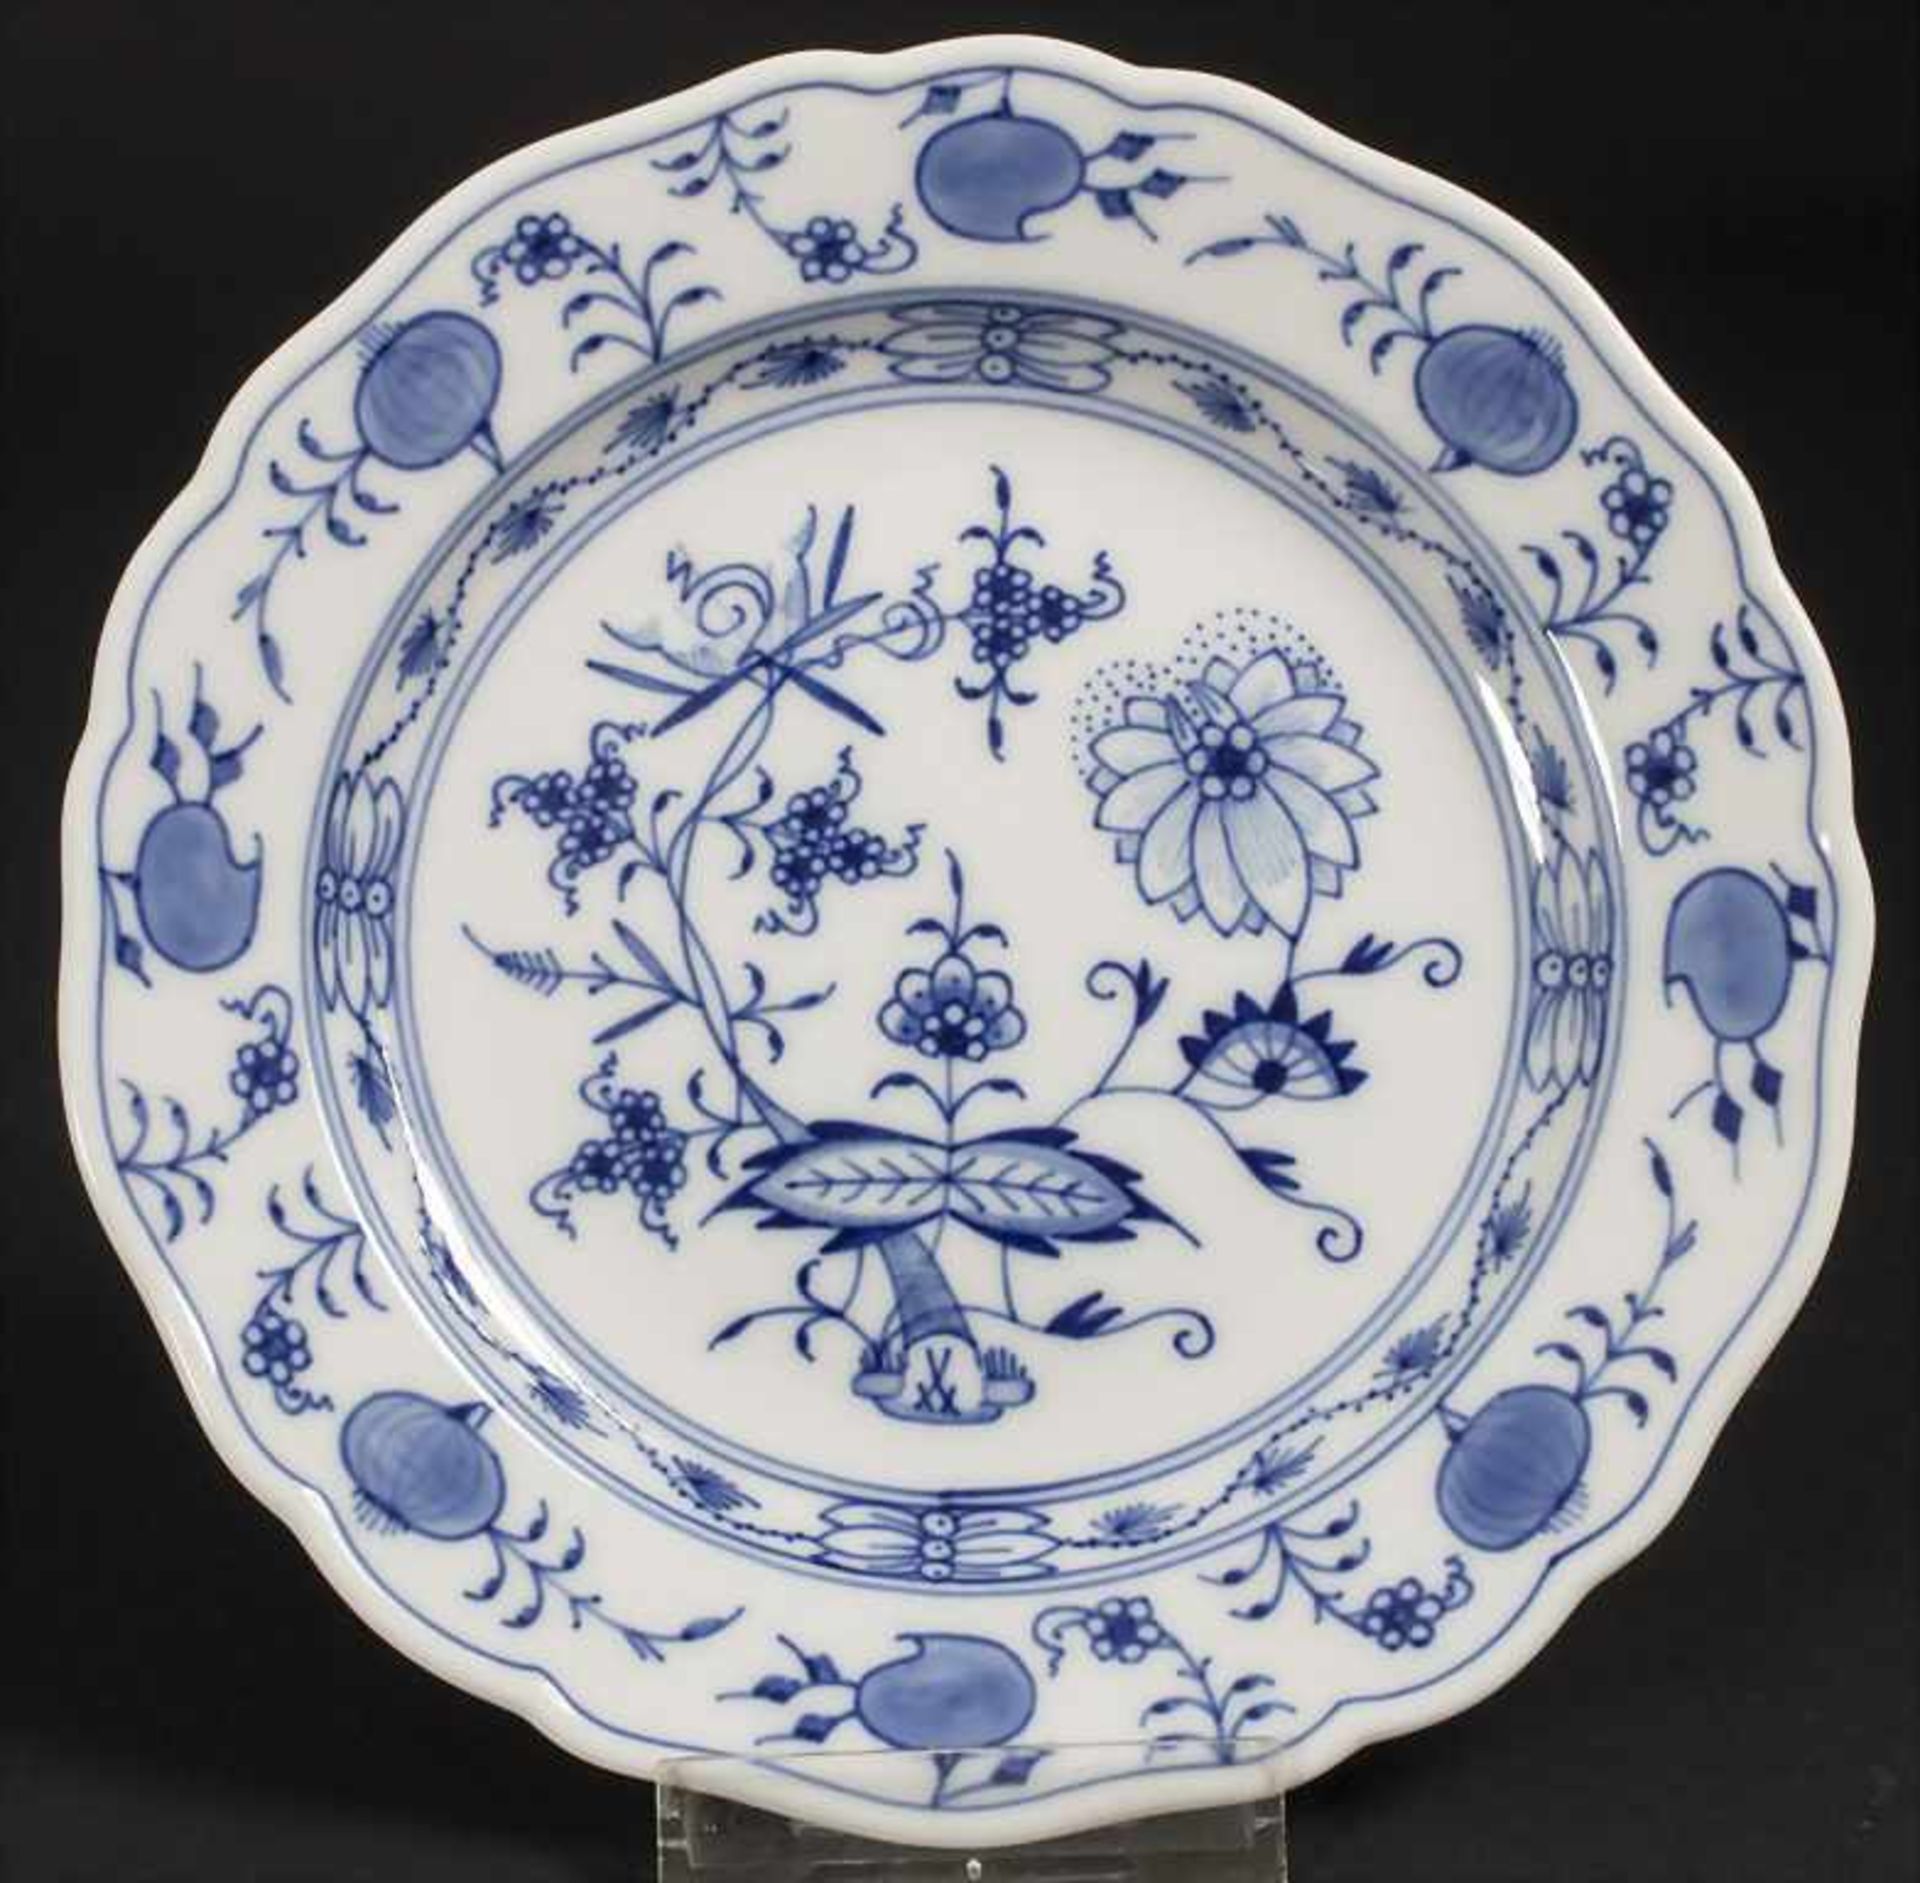 28 tlg. Service 'Zwiebelmuster' / A 28-piece dinner set with 'Onion Pattern', Meissen, 20. Jh. - Image 15 of 17